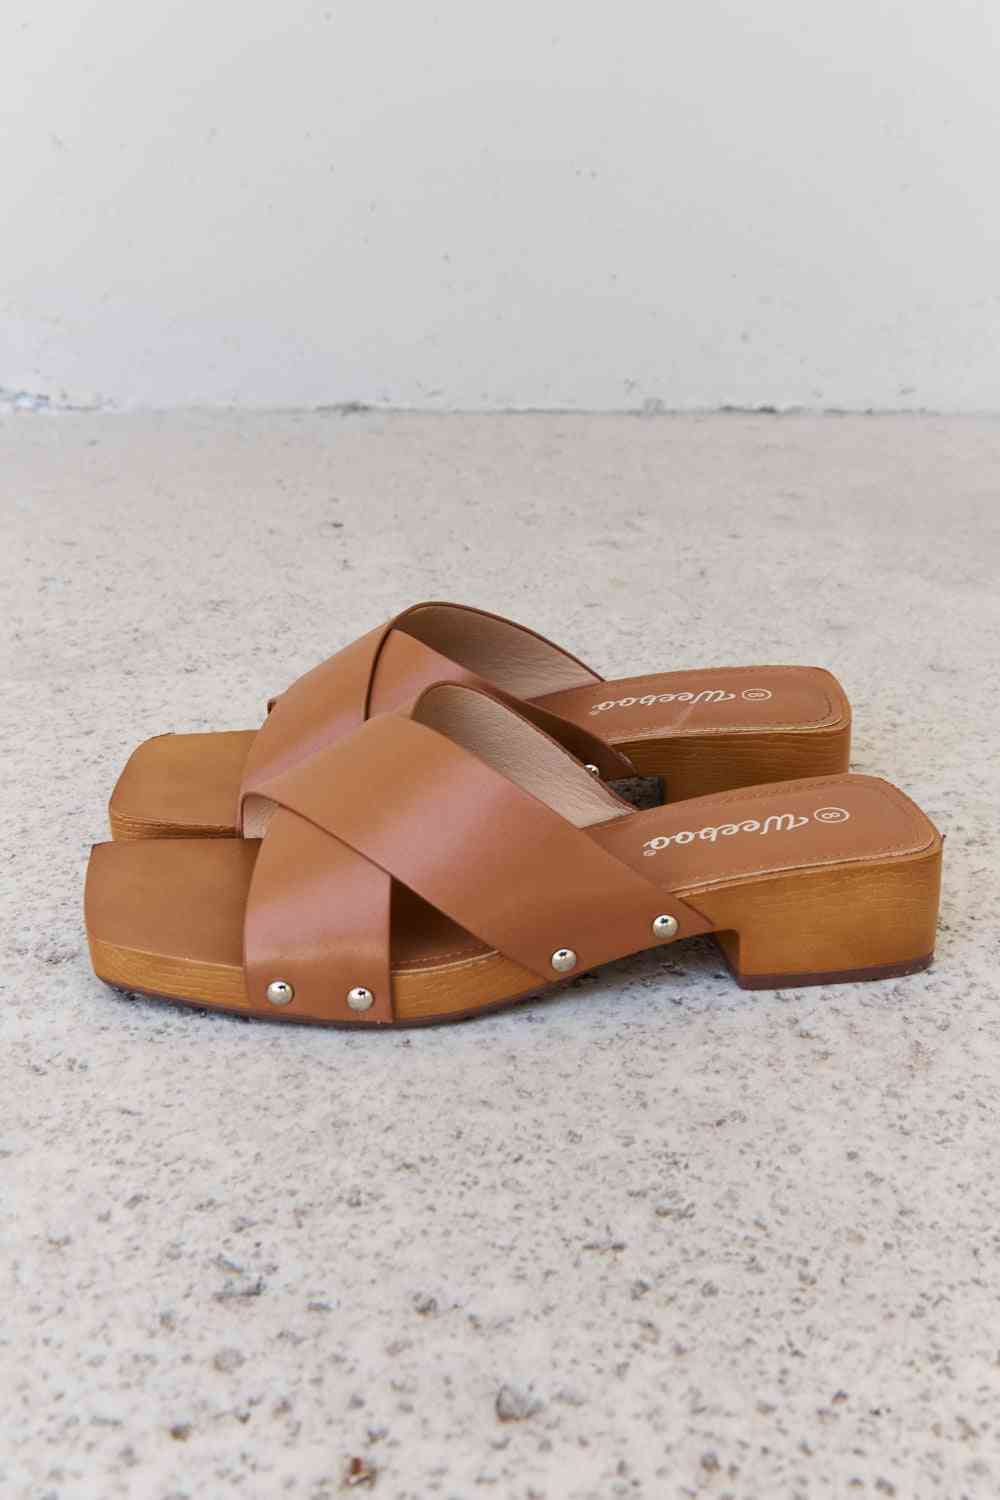 Sand Clogs Vegan Leather Womens Sandals | Hypoallergenic - Allergy Friendly - Naturally Free